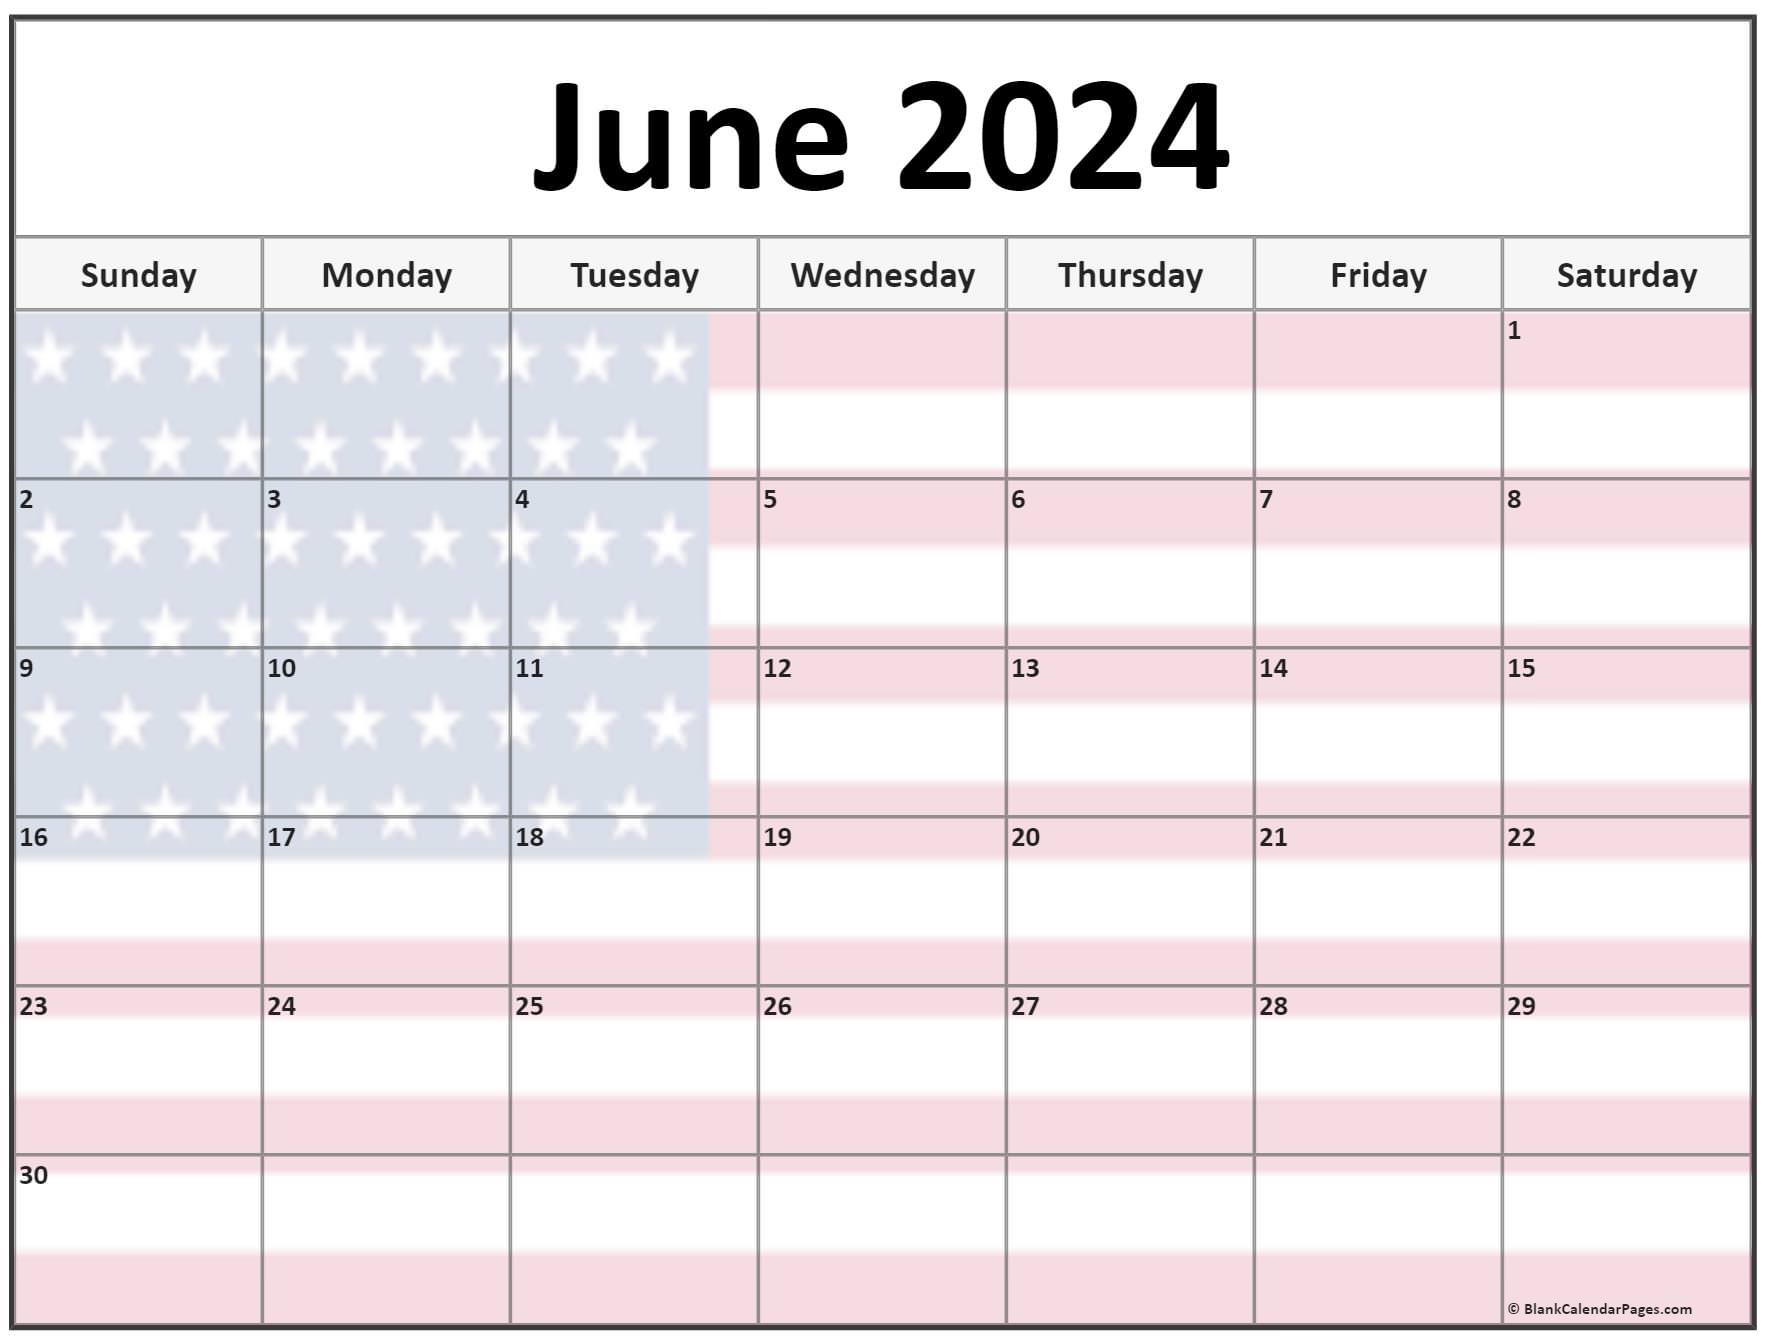 collection-of-june-2023-photo-calendars-with-image-filters